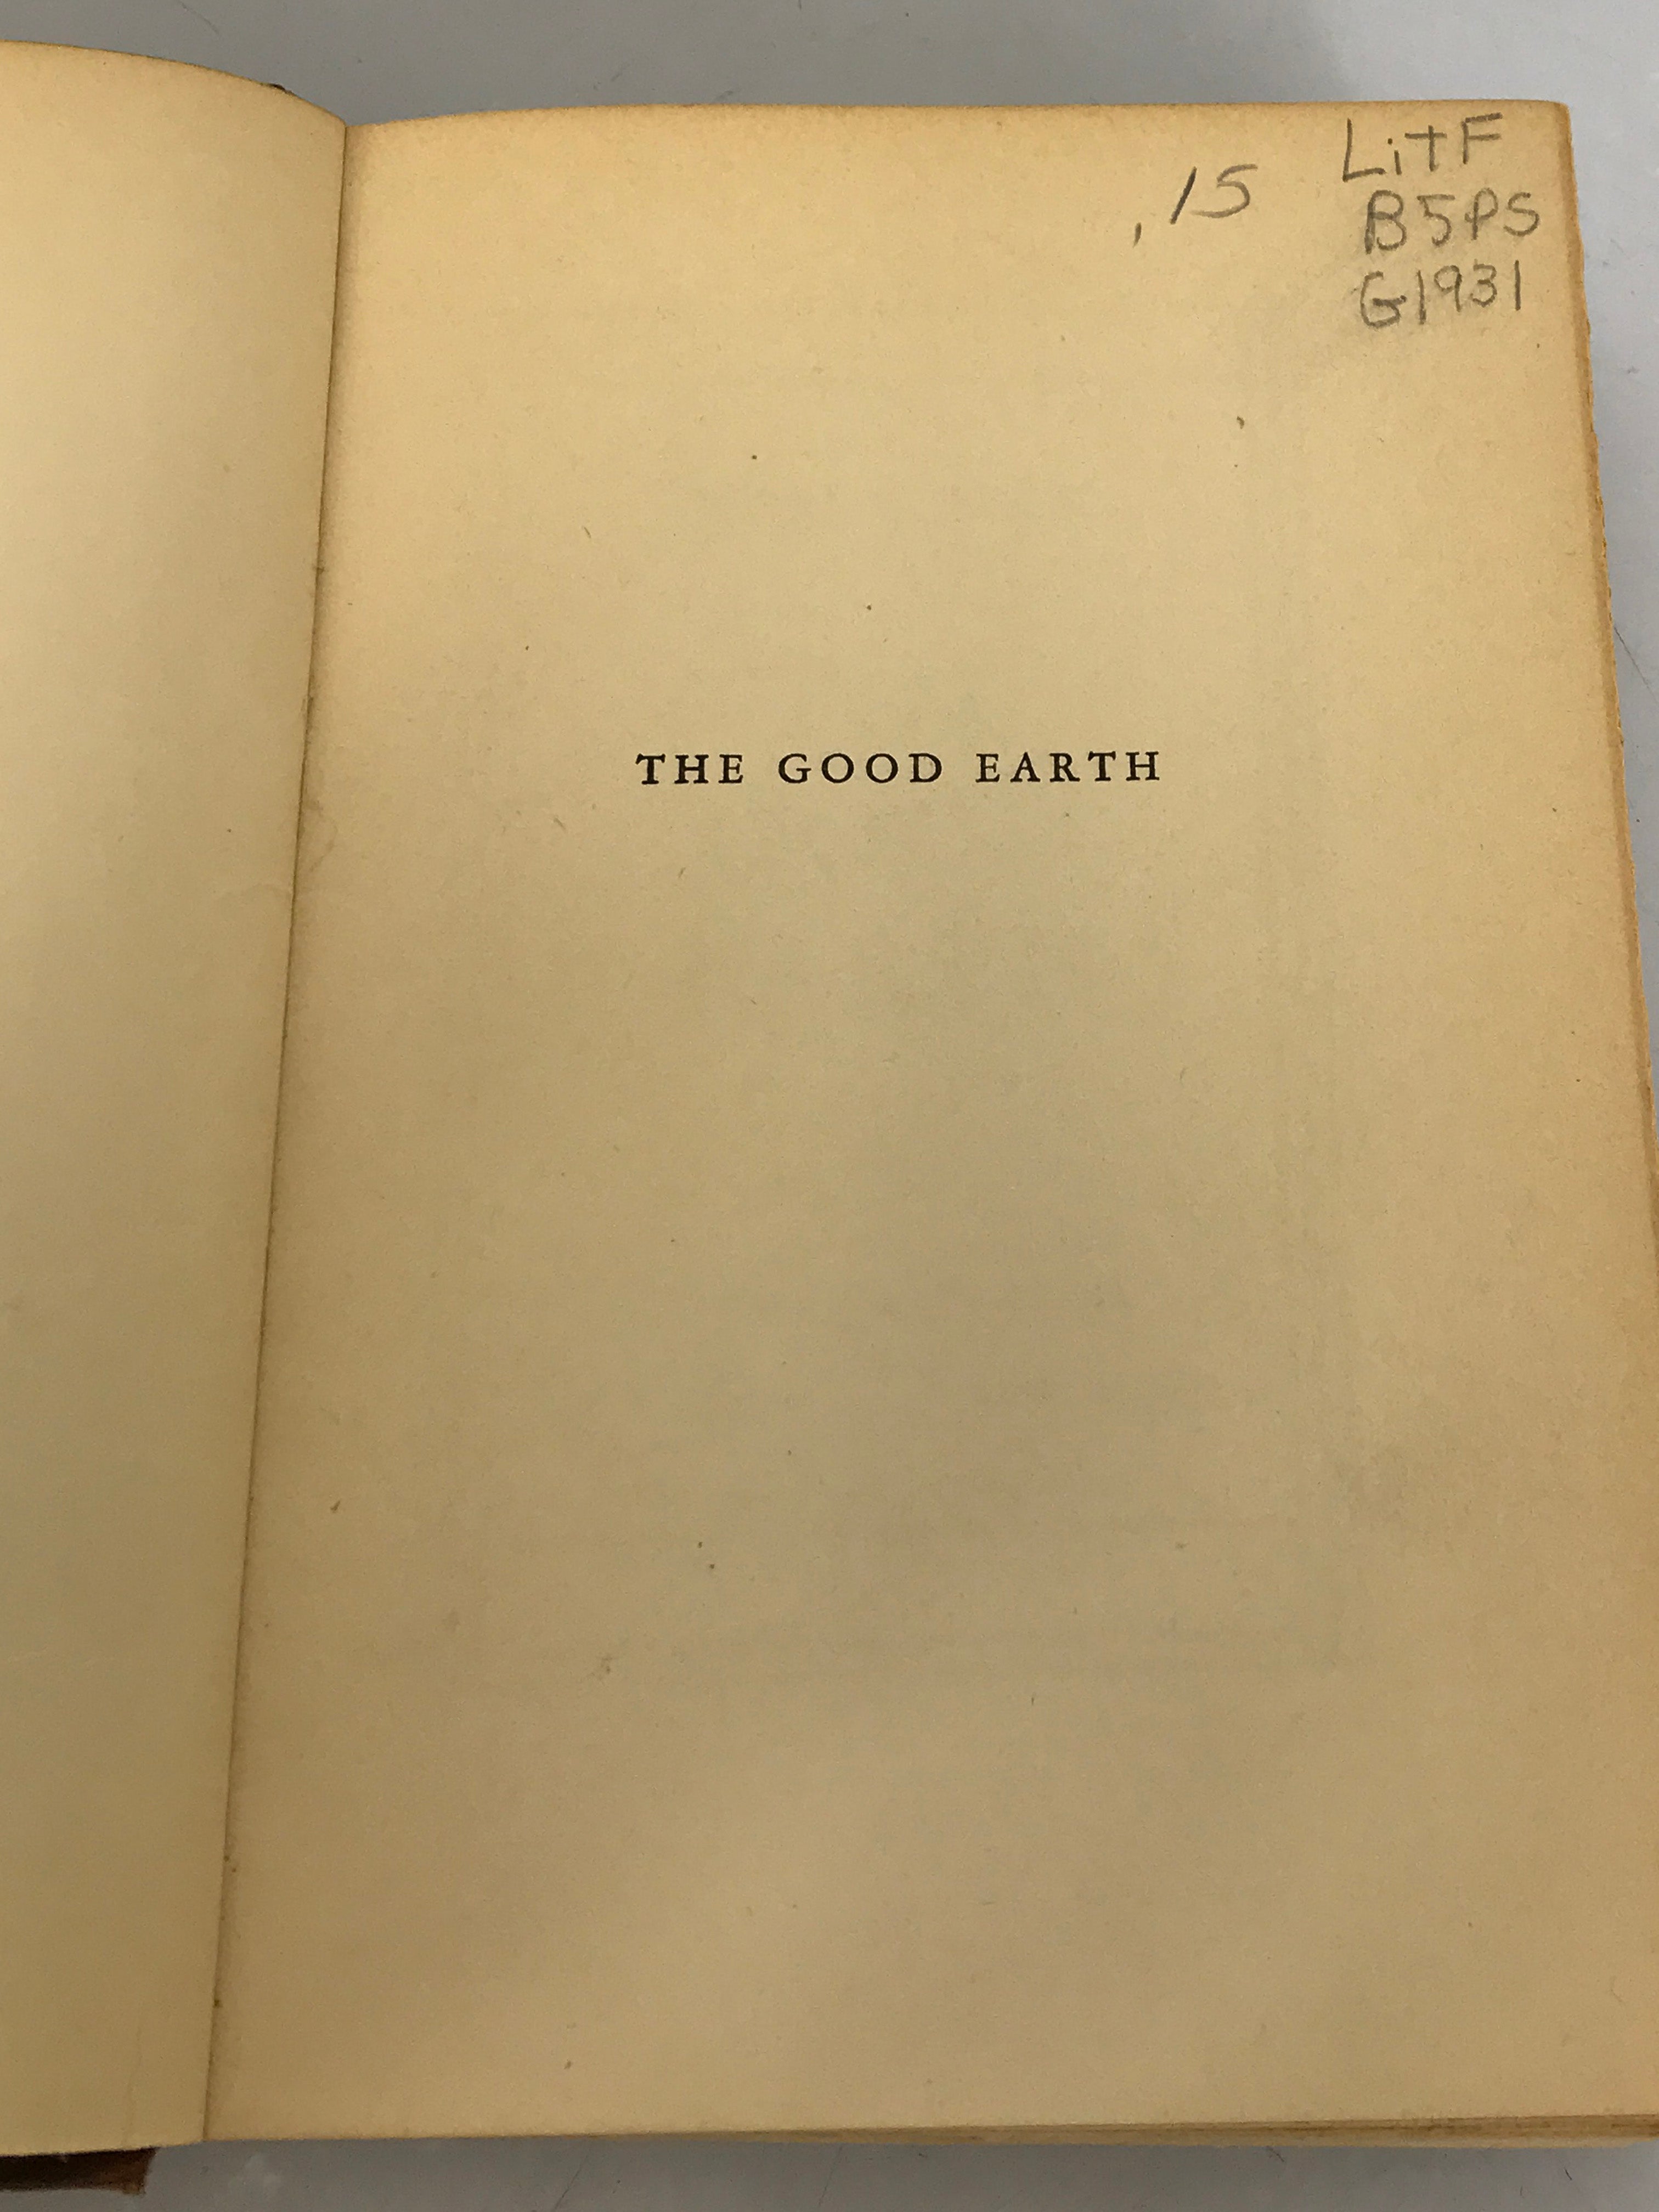 Lot of 2 Pearl S. Buck Classics The Good Earth and The Living Reed 1933, 1963 HC